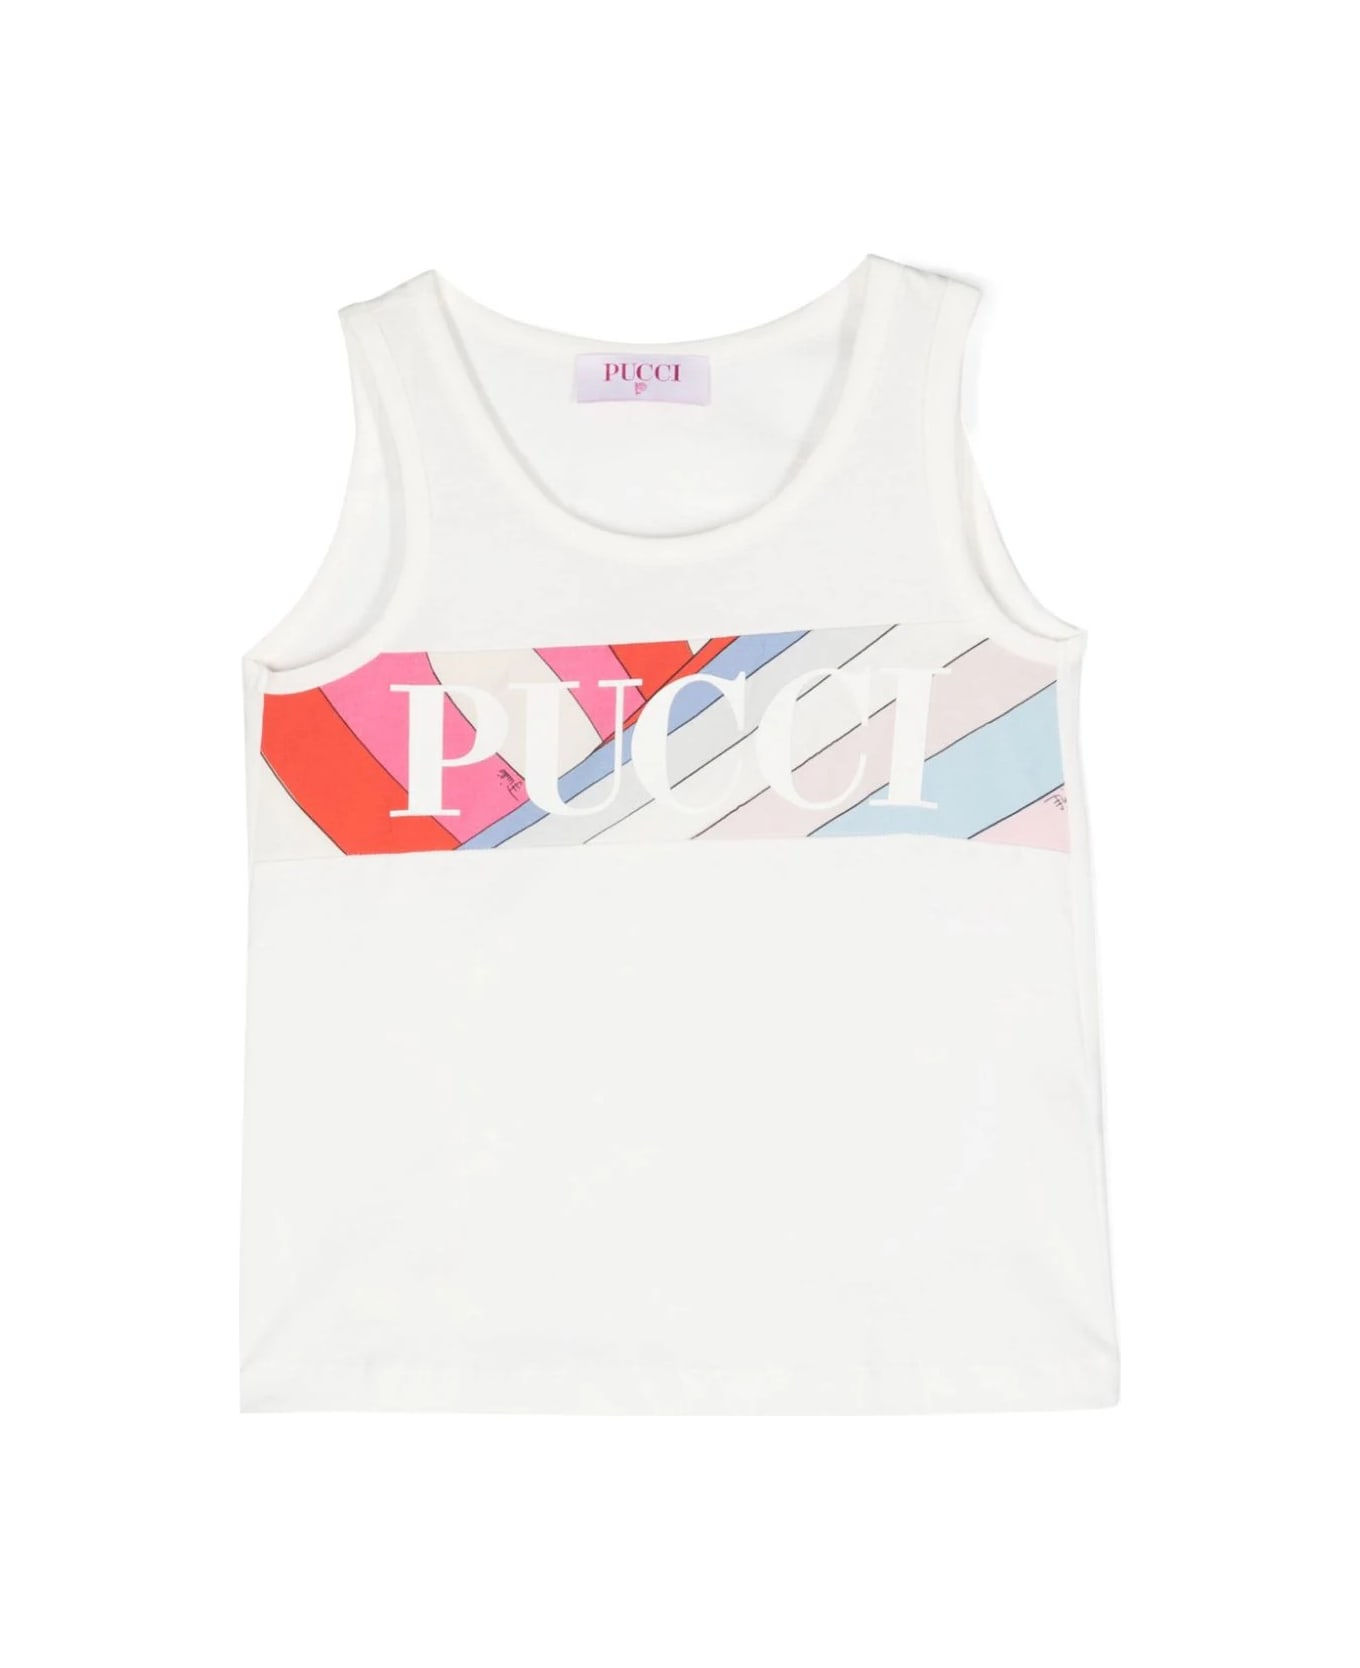 Pucci White Tank Top With Pucci Print On Iride Band - White